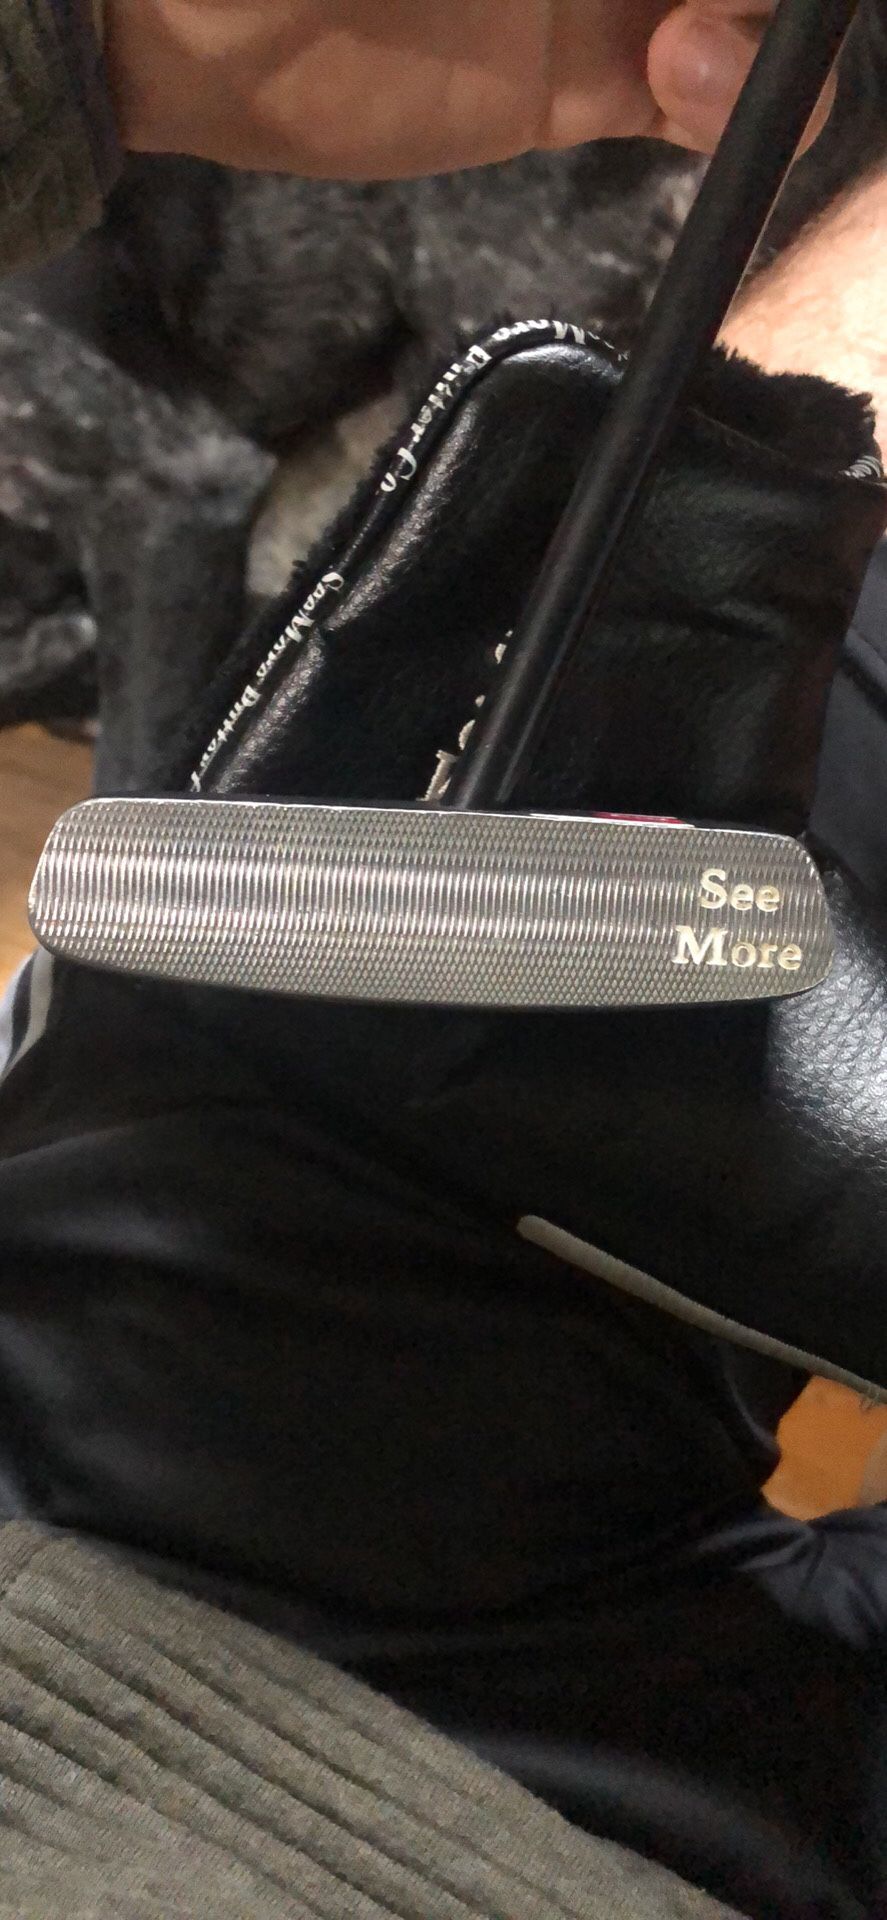 Seemore SS303 milled putter